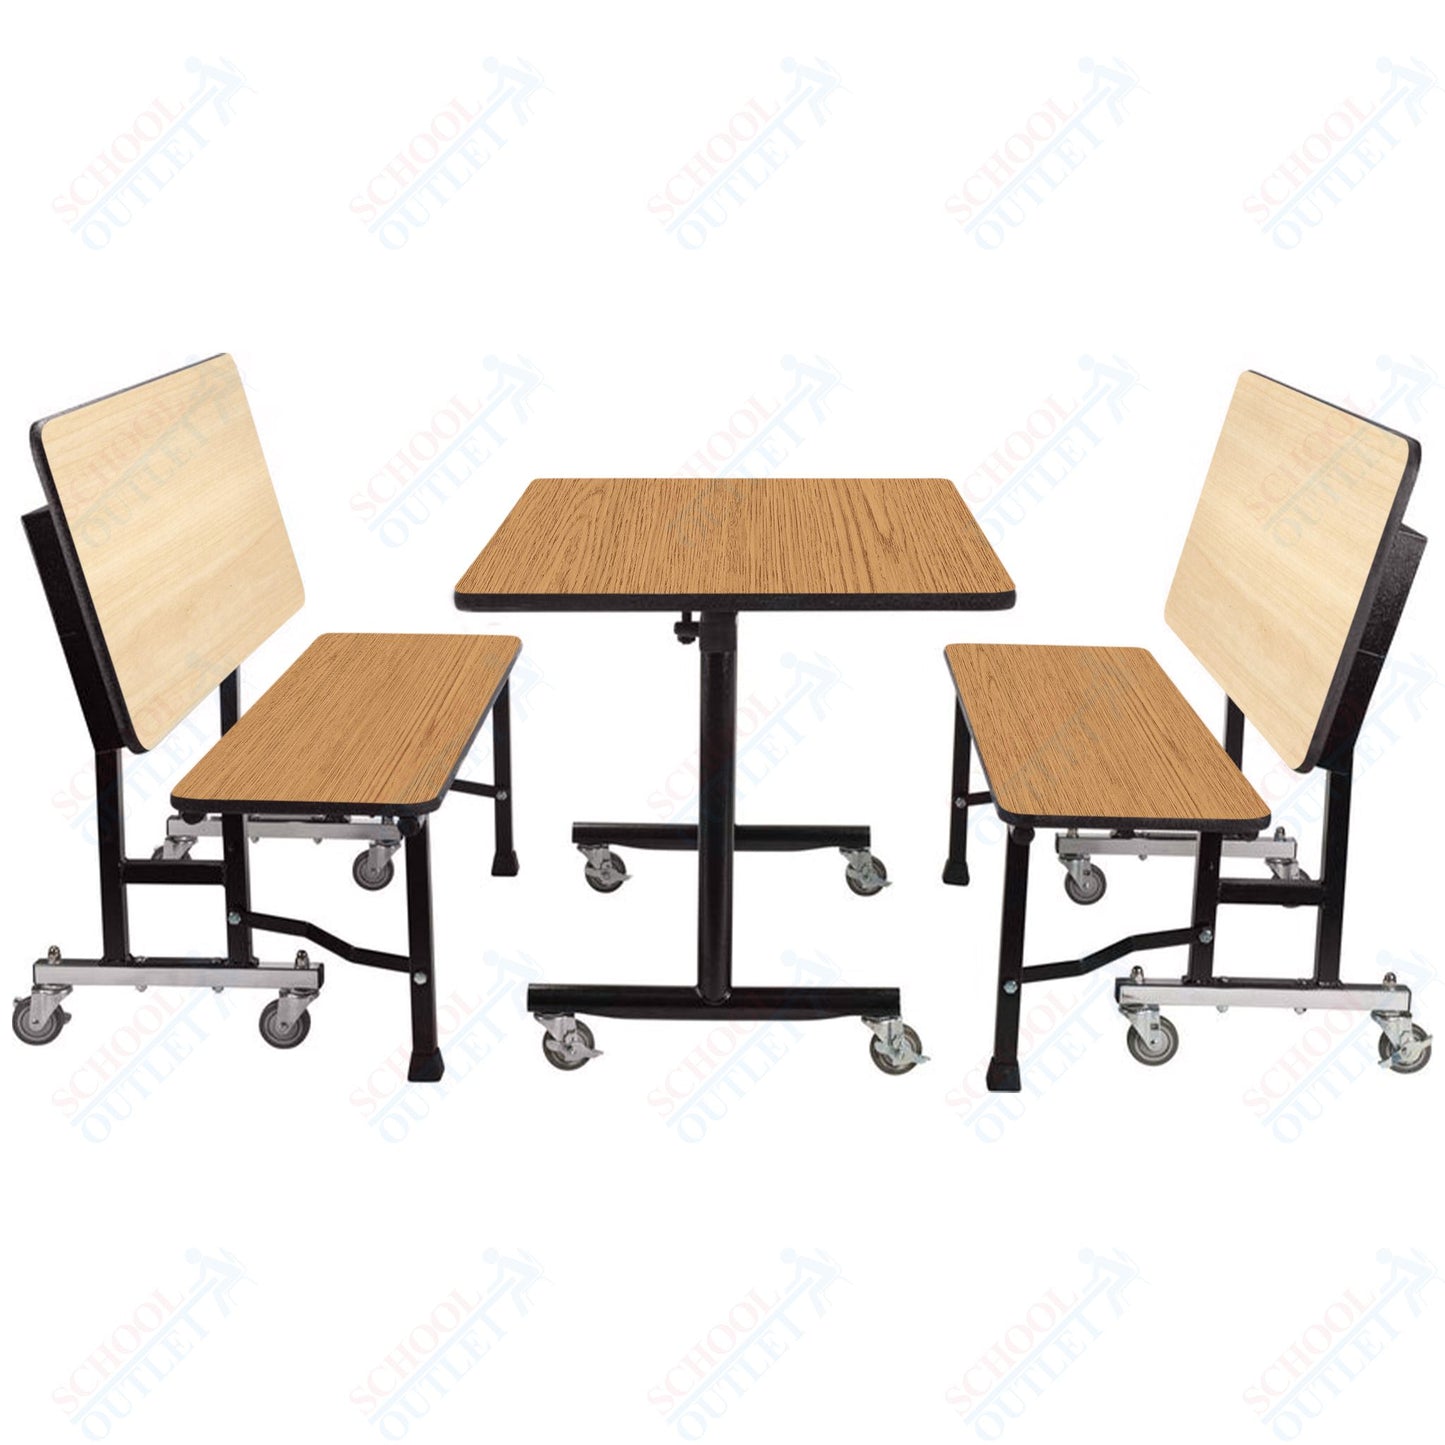 NPS ToGo Booth Set, (1) 24"x48" Table and (2) 48" Benches, MDF Core (National Public Seating NPS-TGBTH2448MDPE)